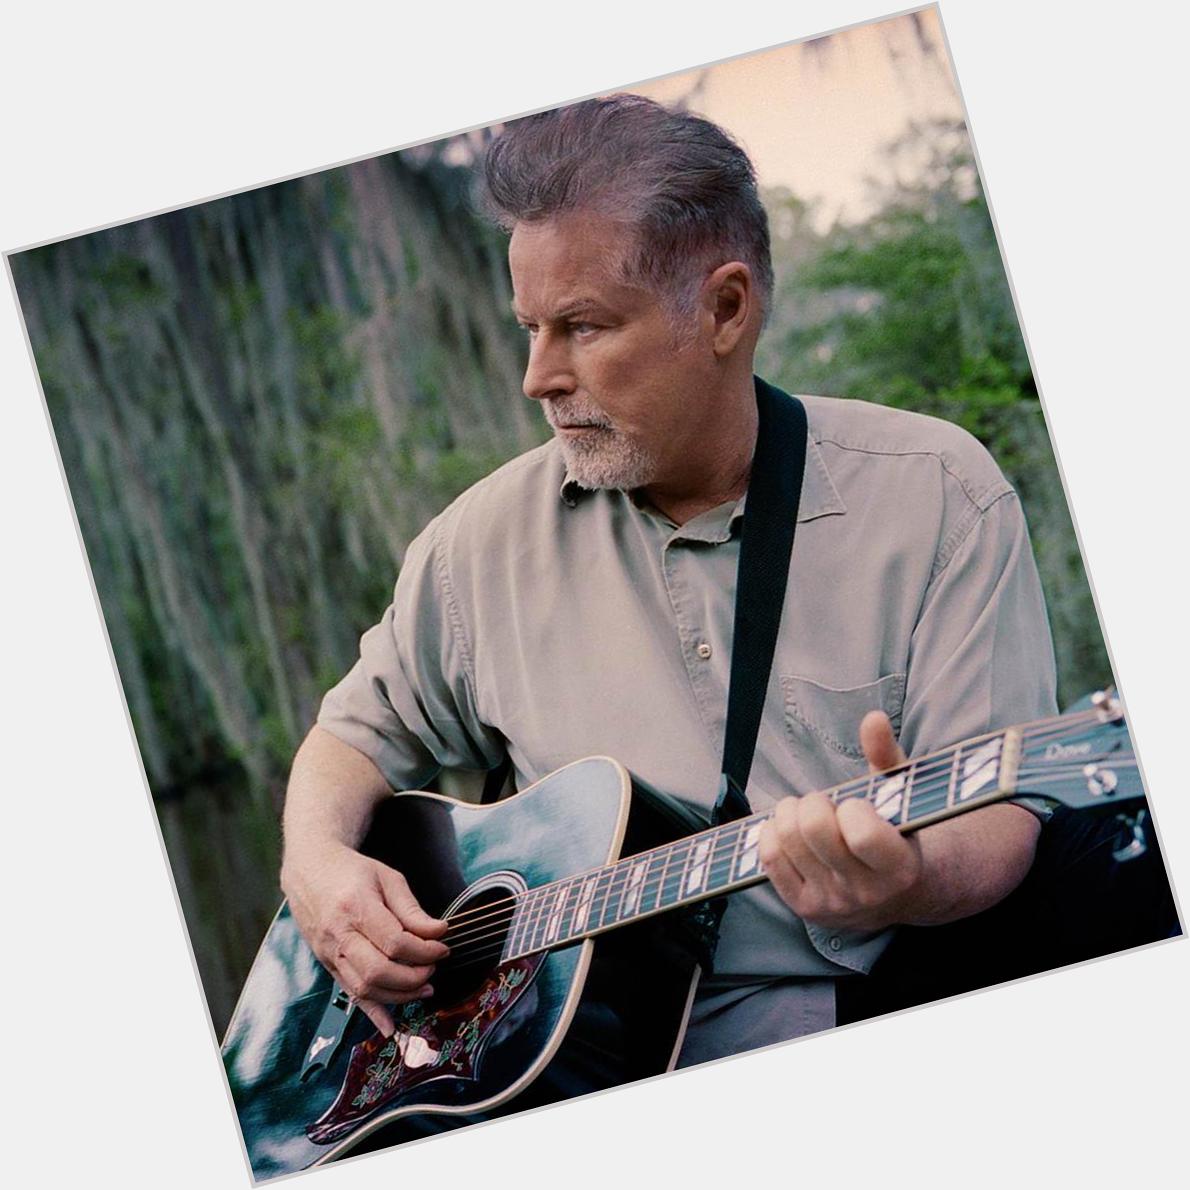 Happy birthday to Don Henley! Take a look at his new album here:  